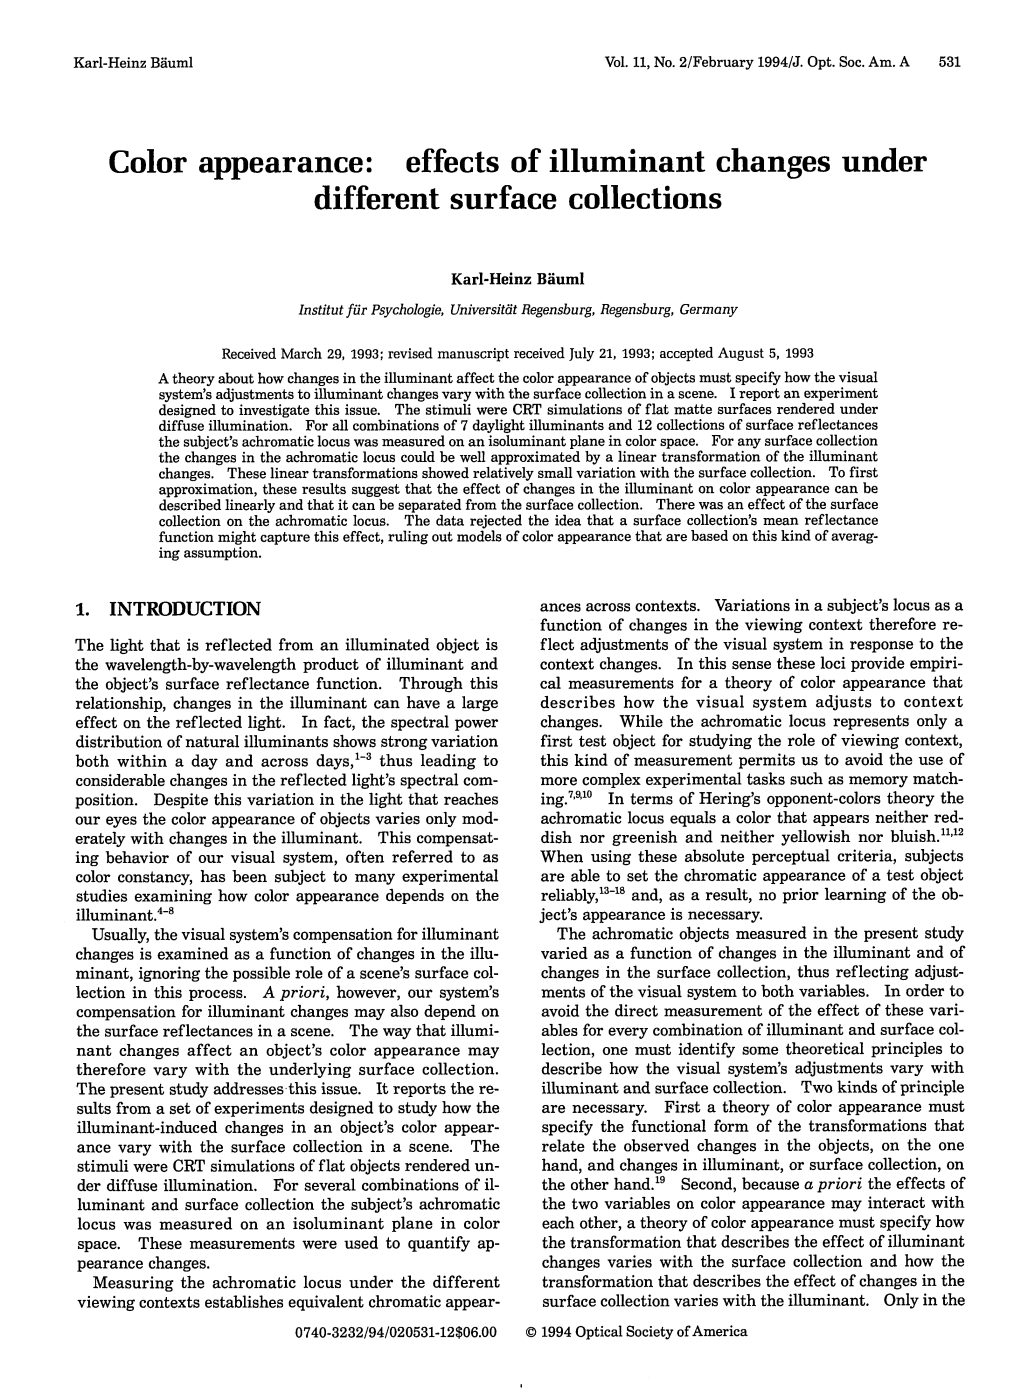 Color Appearance: Effects of Illuminant Changes Under Different Surface Collections